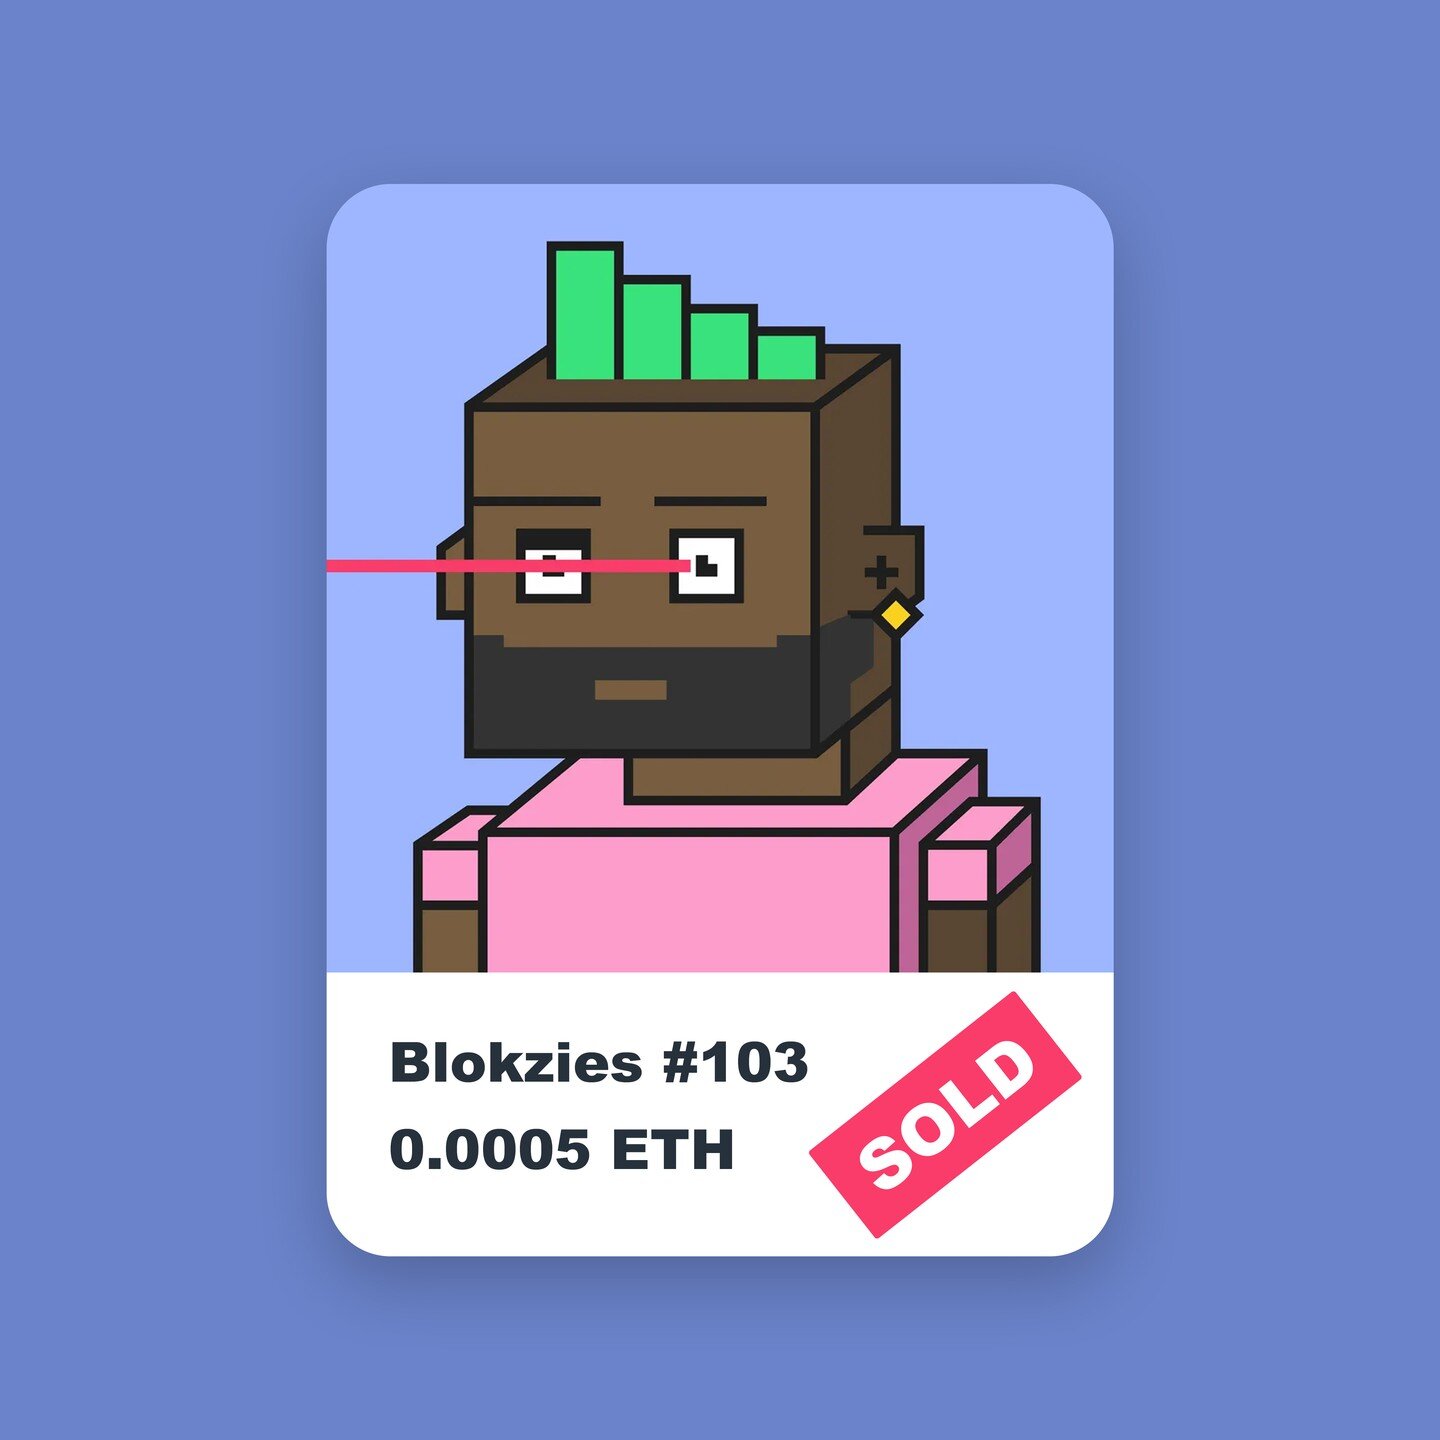 blokzies
🟥 SOLD! 🟥

Blokzies #103 has been sold. So Happy and grateful for your support. Congrats to @bootlegvideogames Enjoy it 😊

#nft #nfts #NFTCollection #opensea #eth #nftcollector #Ethereum #psychedelic
#nftart #nftcommunity #nftcollectors #